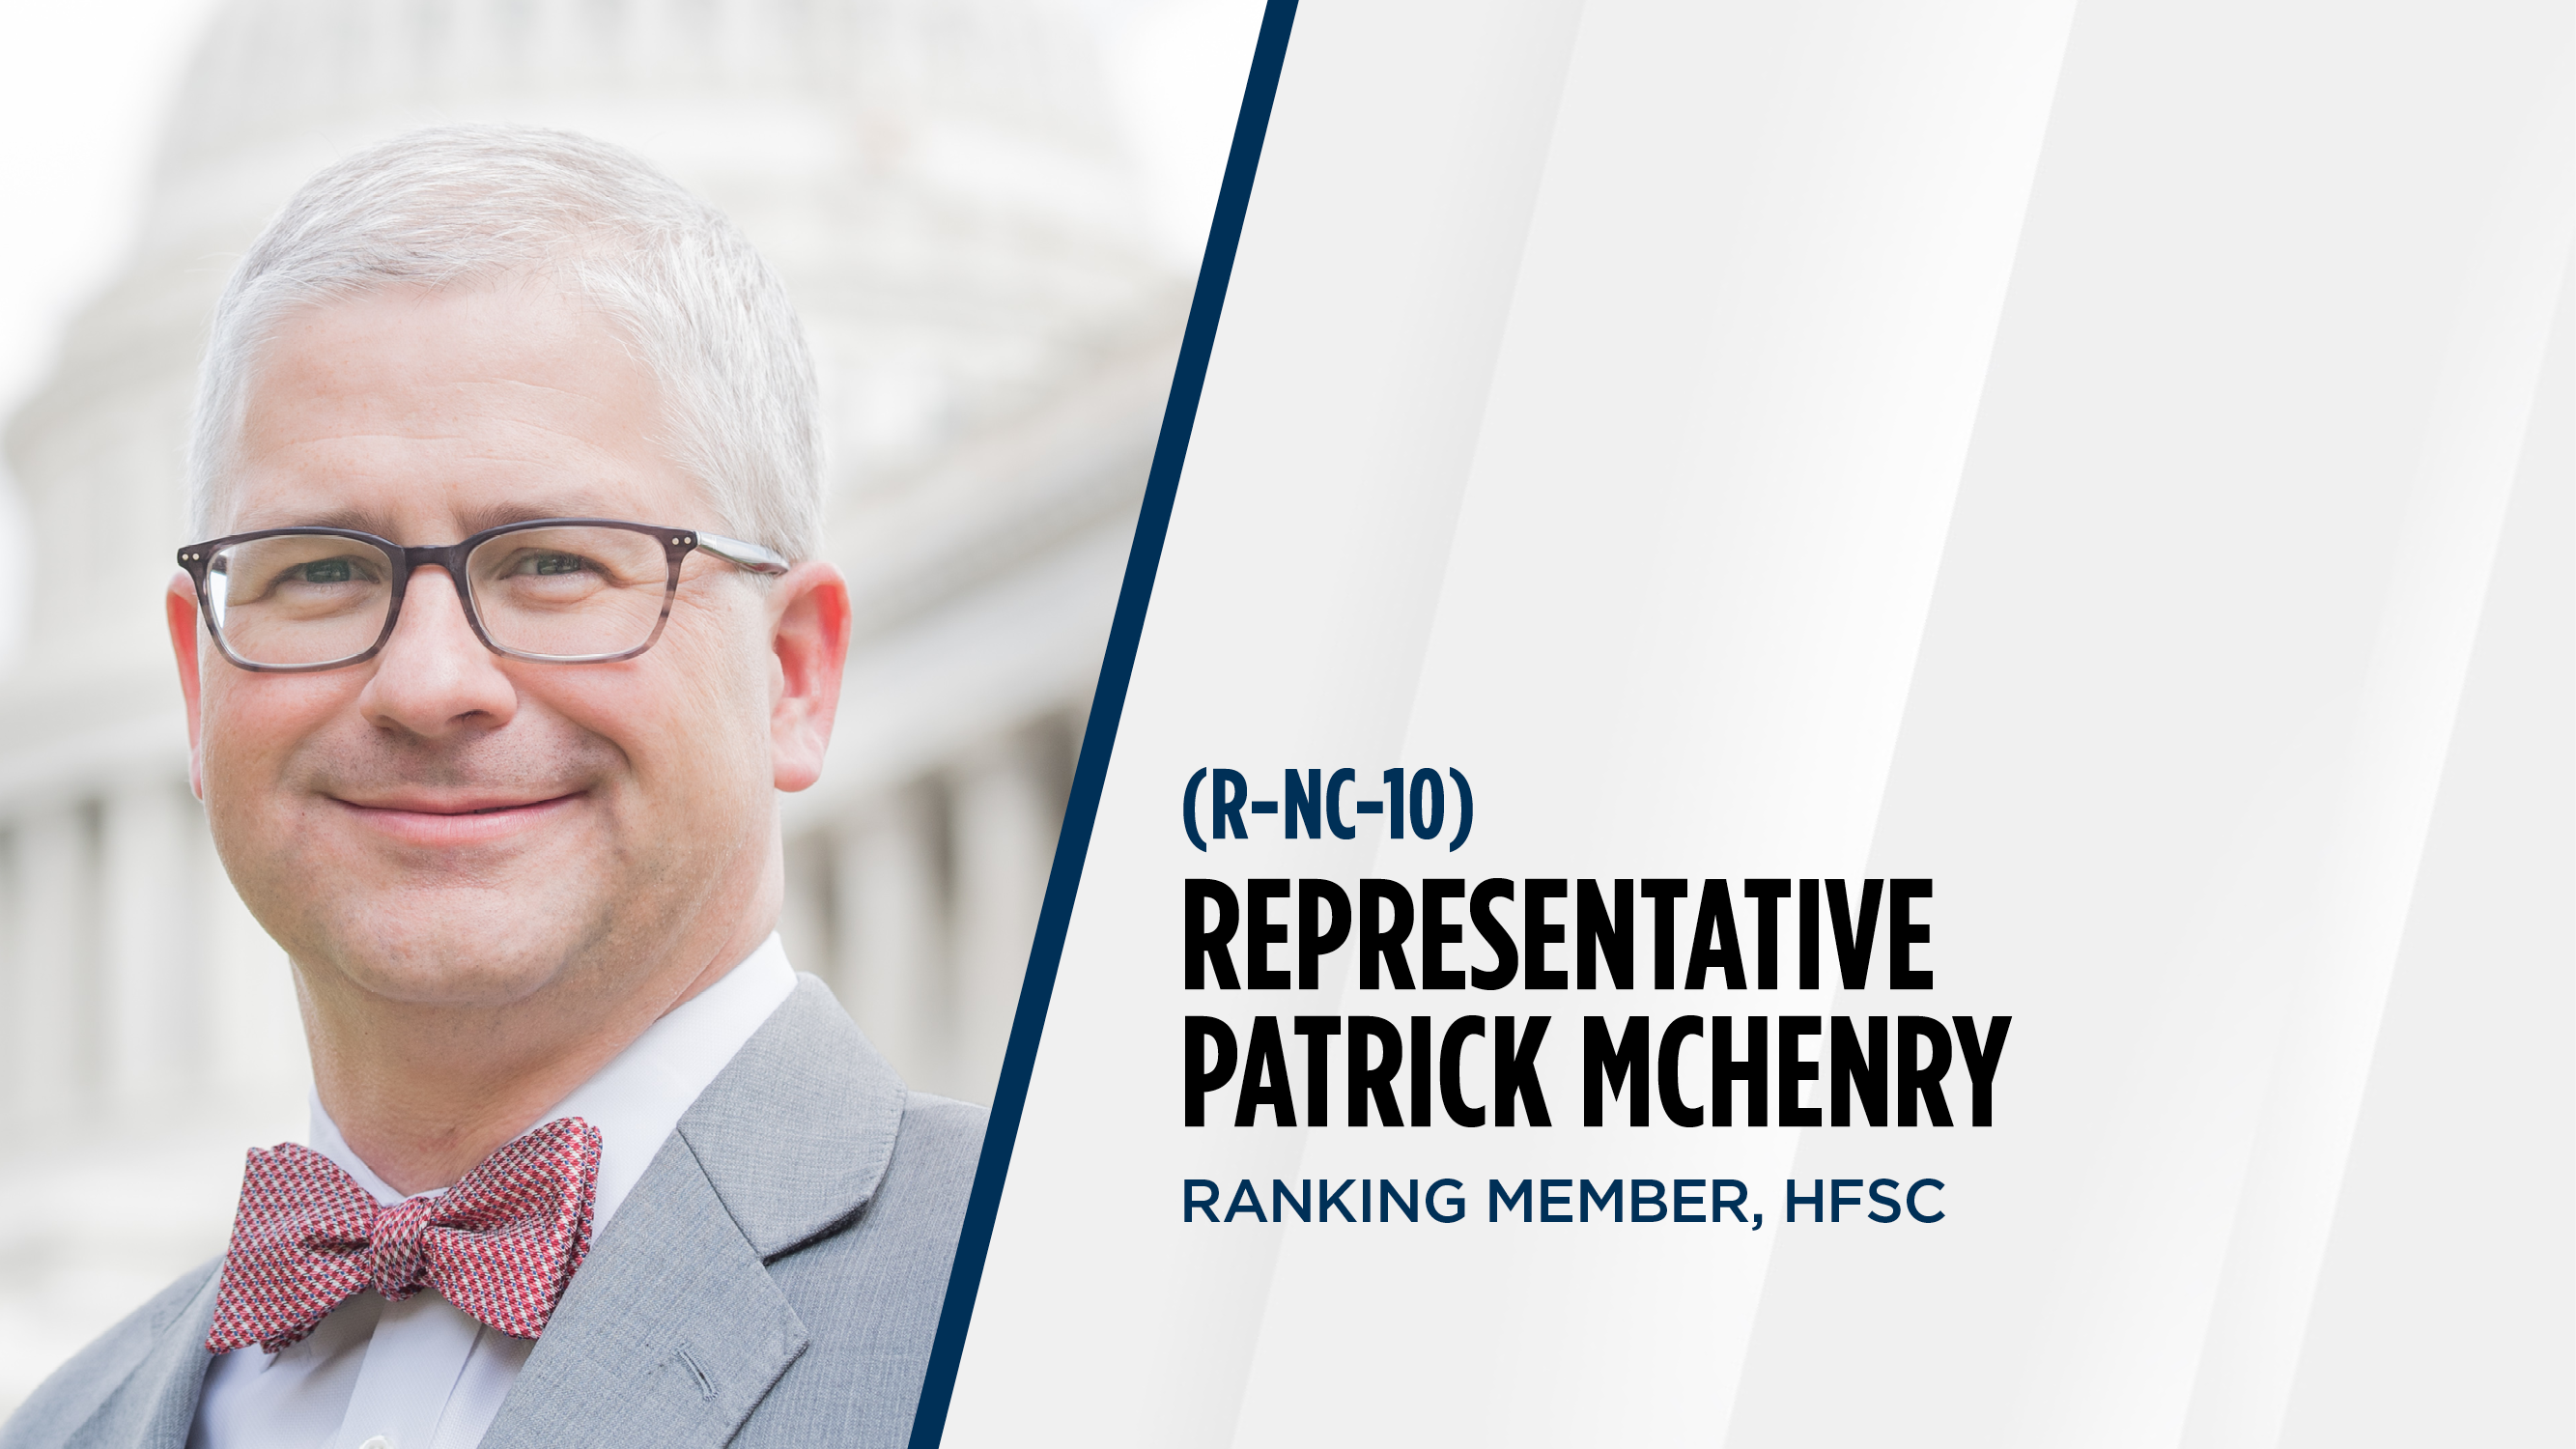 Rep McHenry